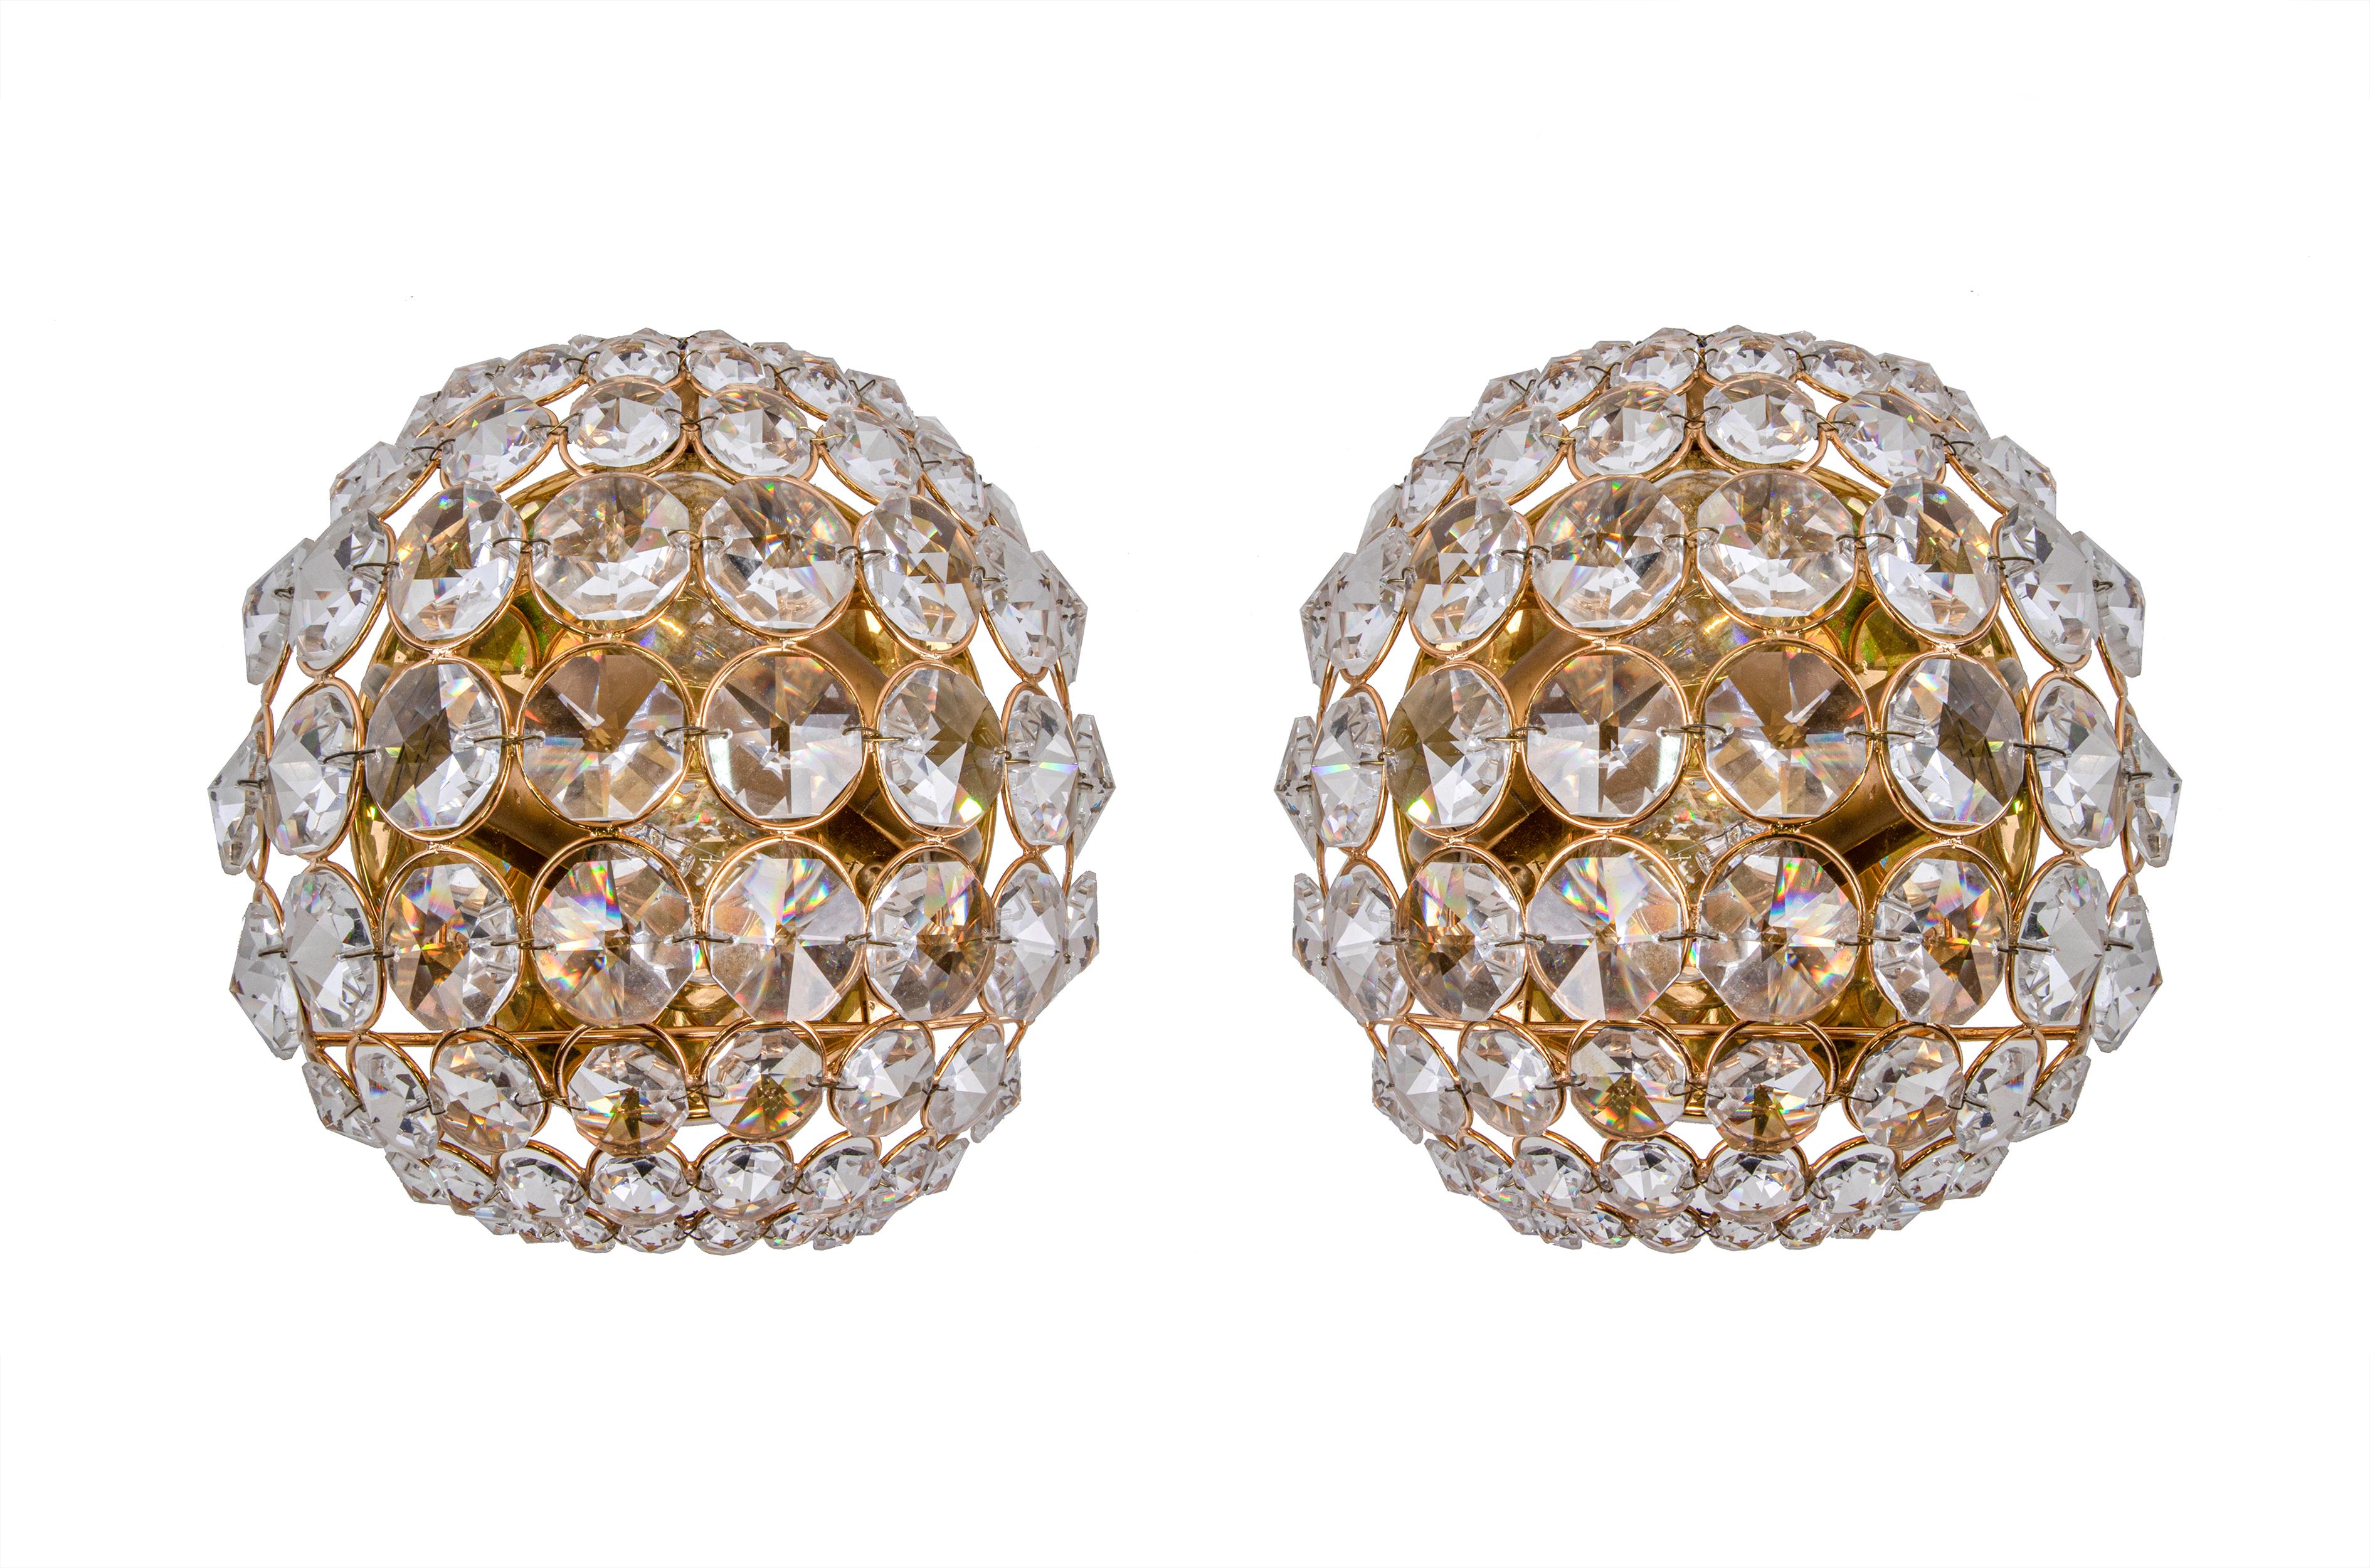 Lovely and extraordinary wall sconces with a 14-carat gold-plated brass frame and Swarovski crystal bubbles. These lamps have an incomparable unique character. A touch of luxury fills the room. Manufactured by Palwa (Palme & Walter), Germany in the